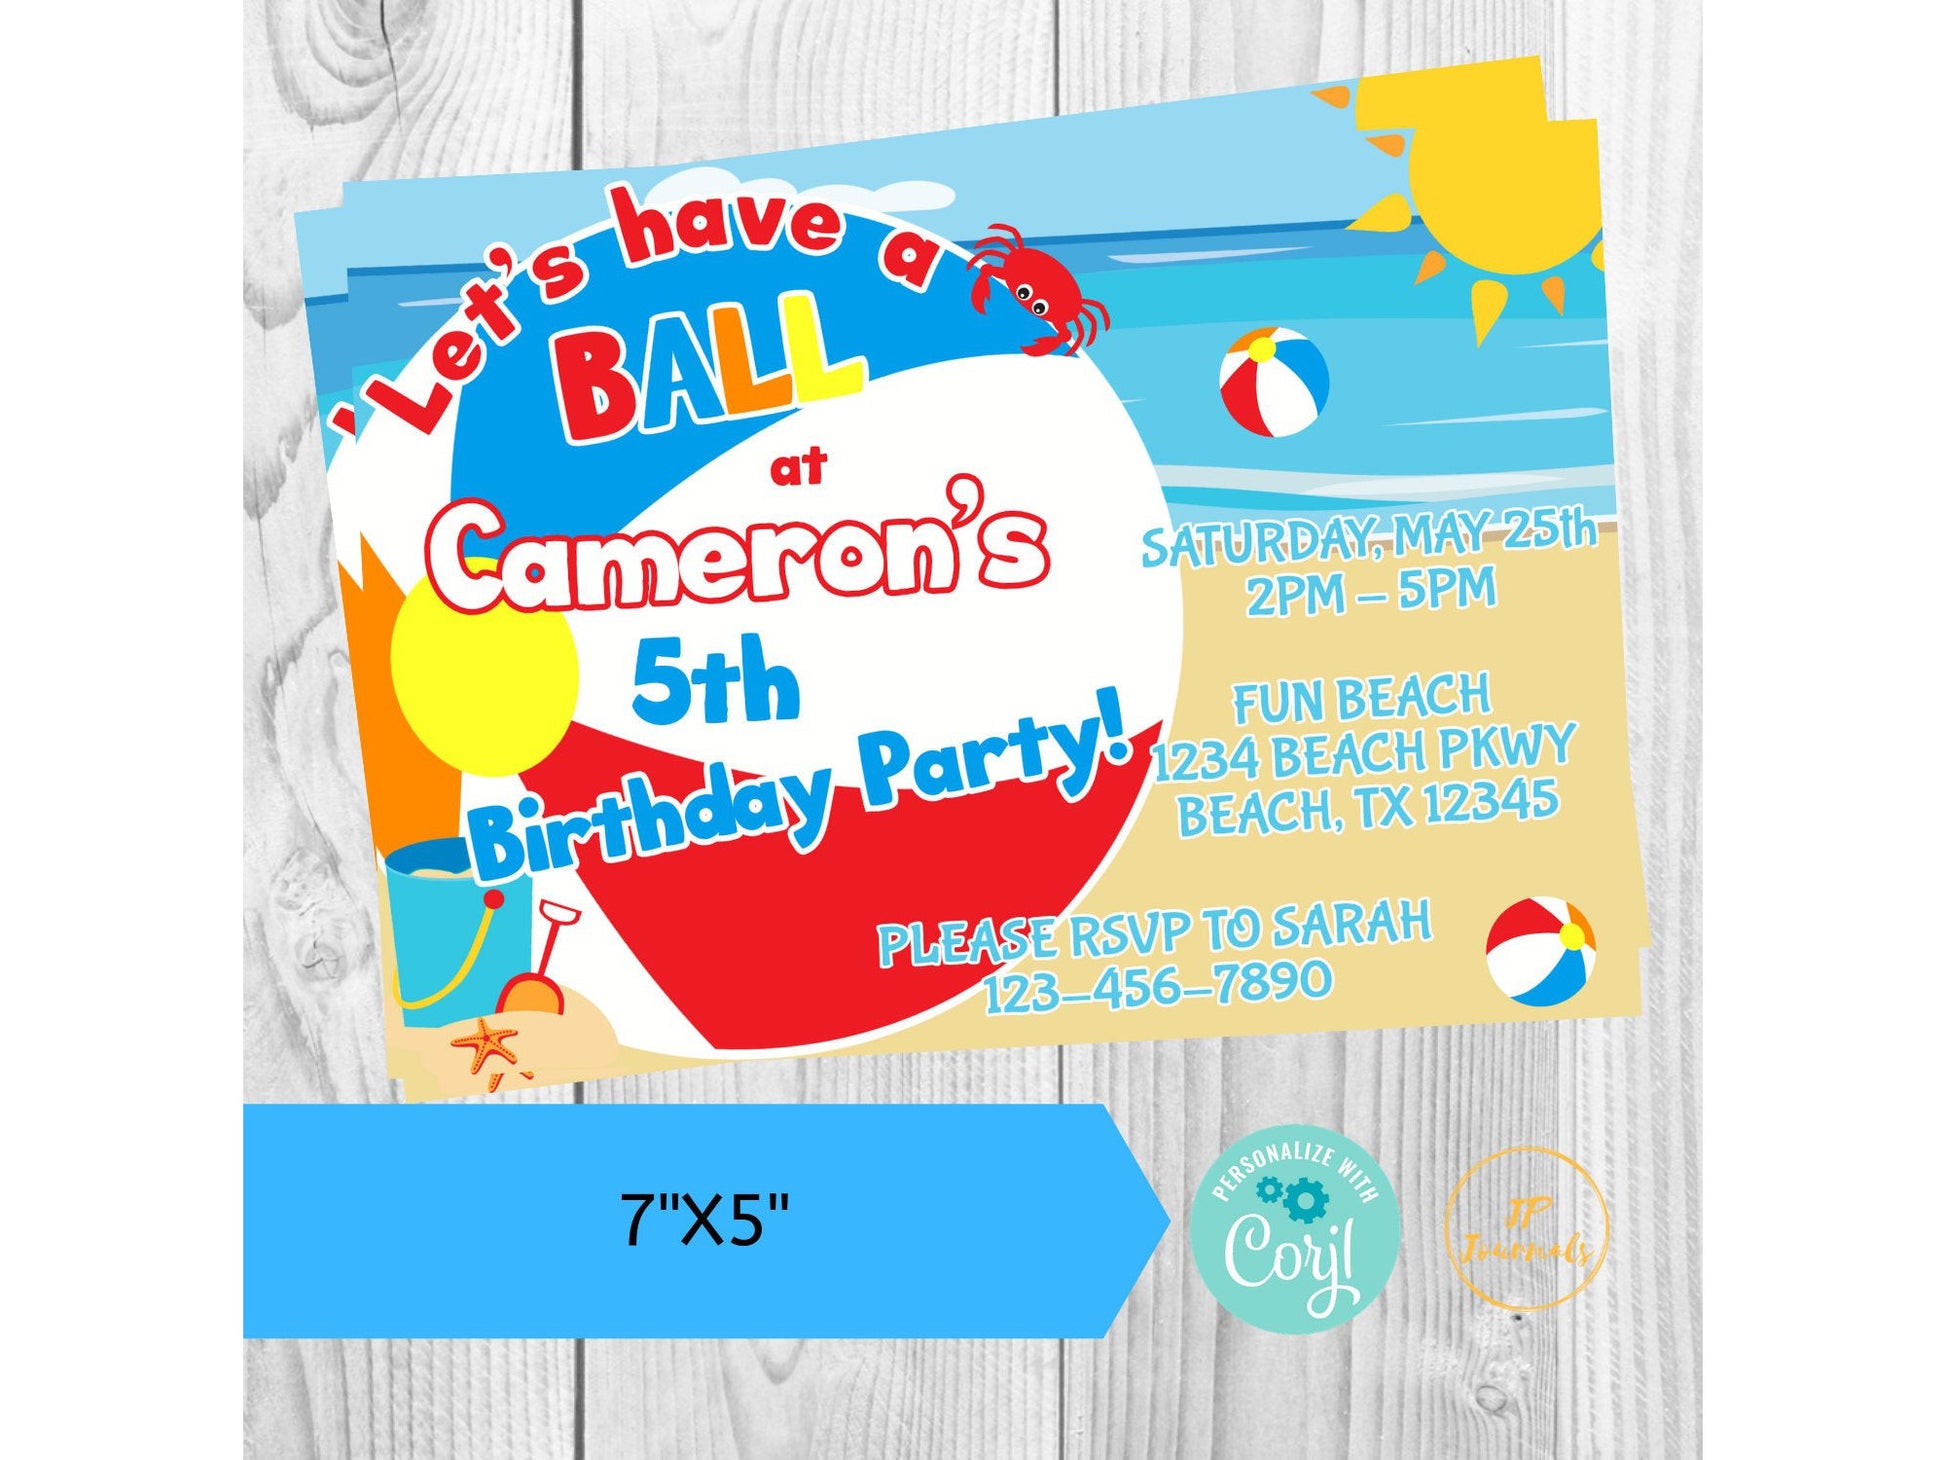 Beach Ball - Let's Have a Ball Birthday Party Invitation